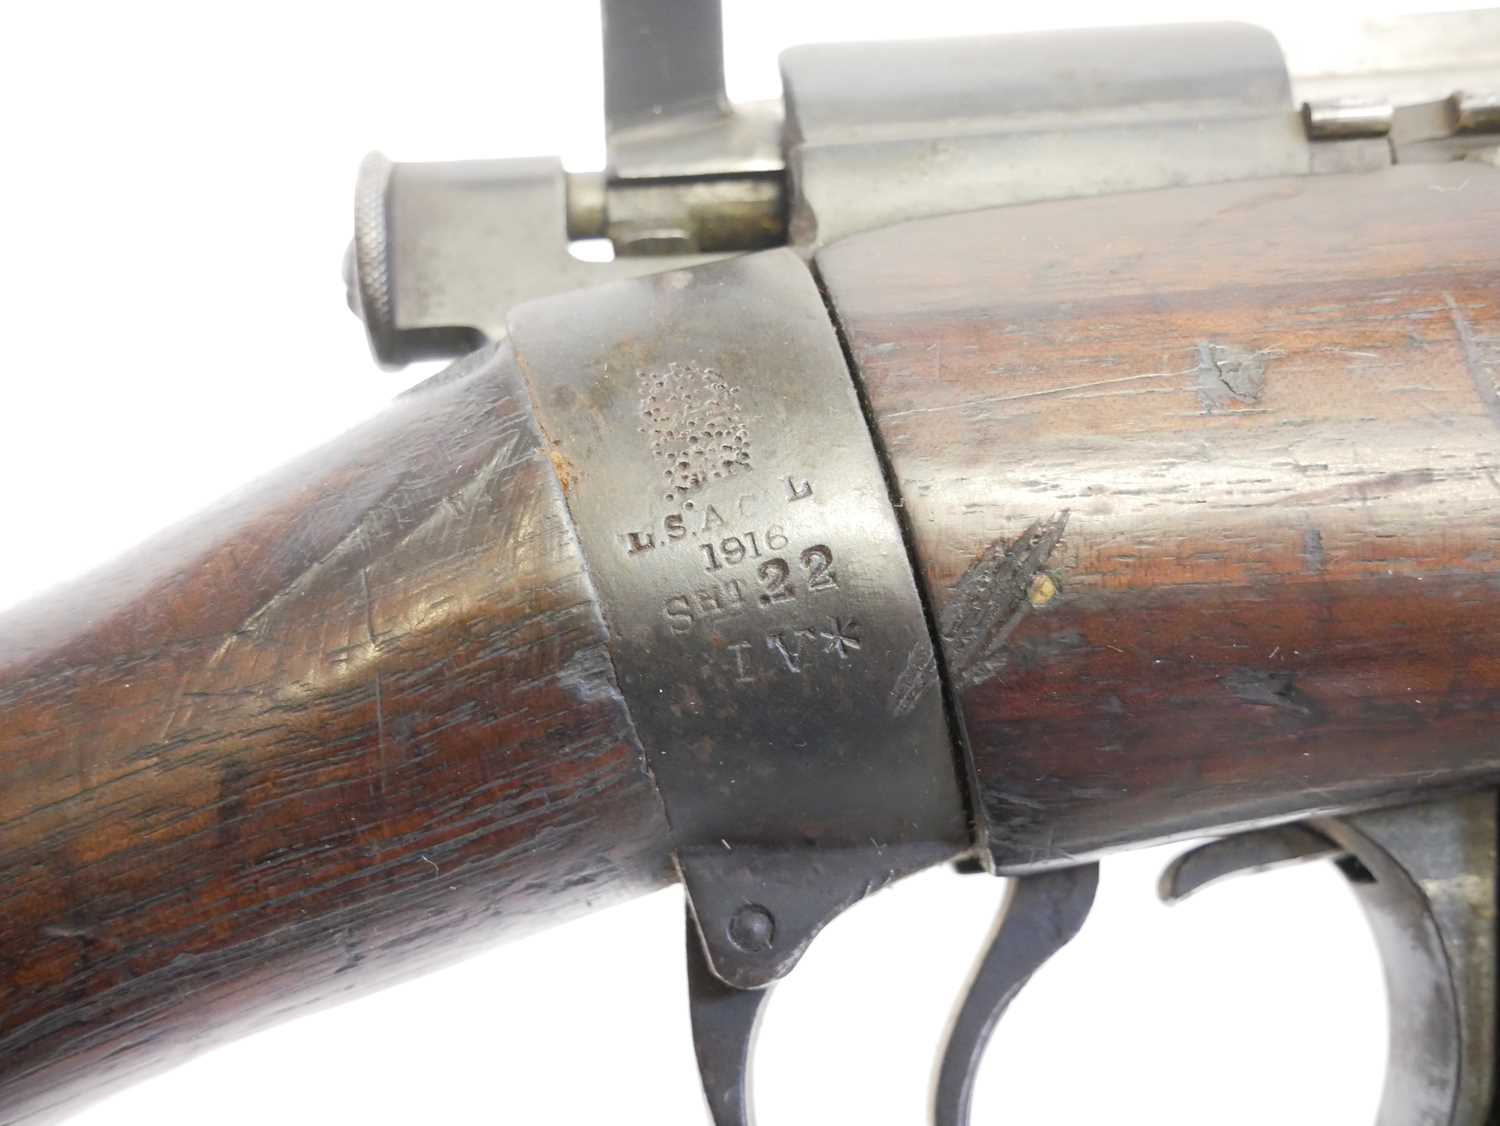 London Small Arms Lee Enfield .22 bolt action rifle, serial number 21324, 25inch barrel fitted - Image 6 of 14